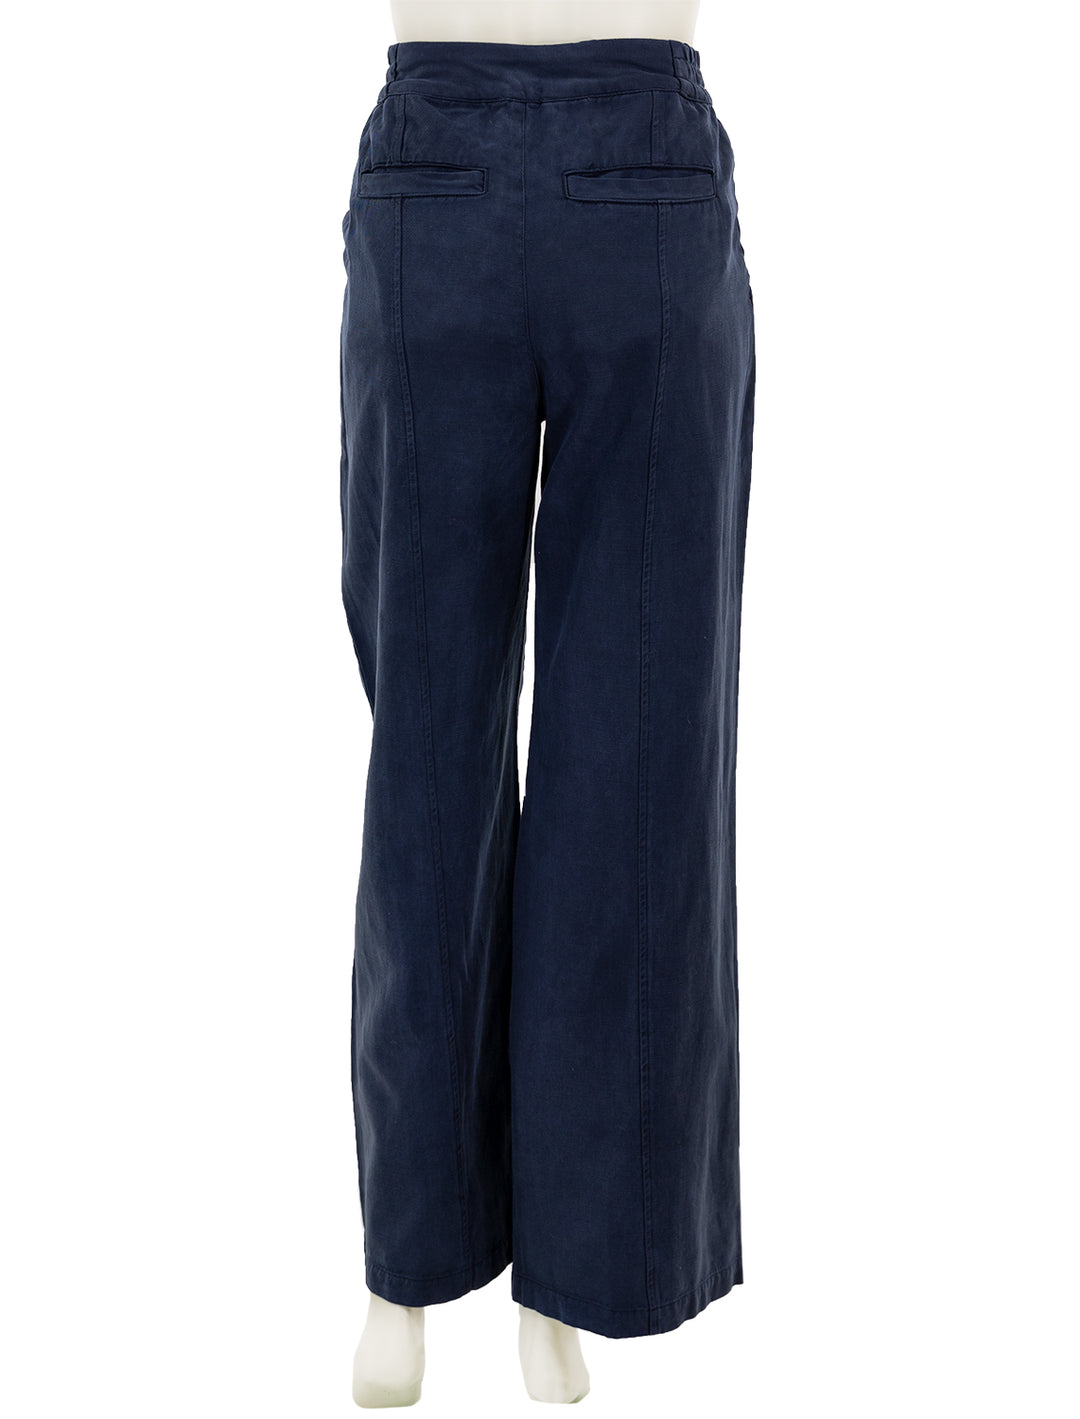 Back view of Rails' greer pant in navy.